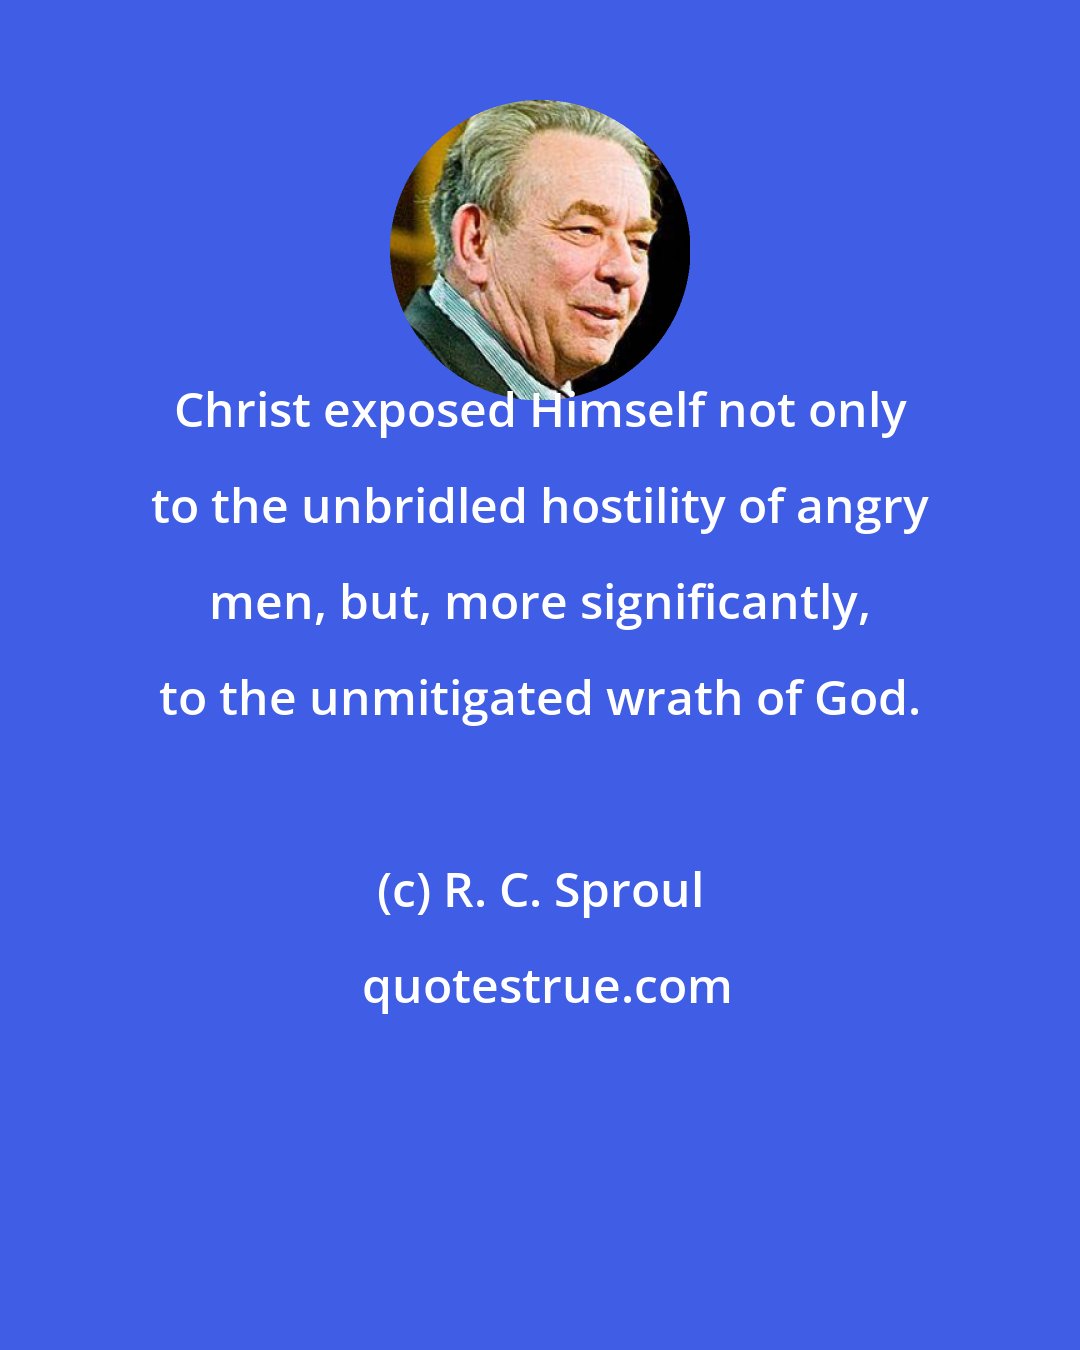 R. C. Sproul: Christ exposed Himself not only to the unbridled hostility of angry men, but, more significantly, to the unmitigated wrath of God.